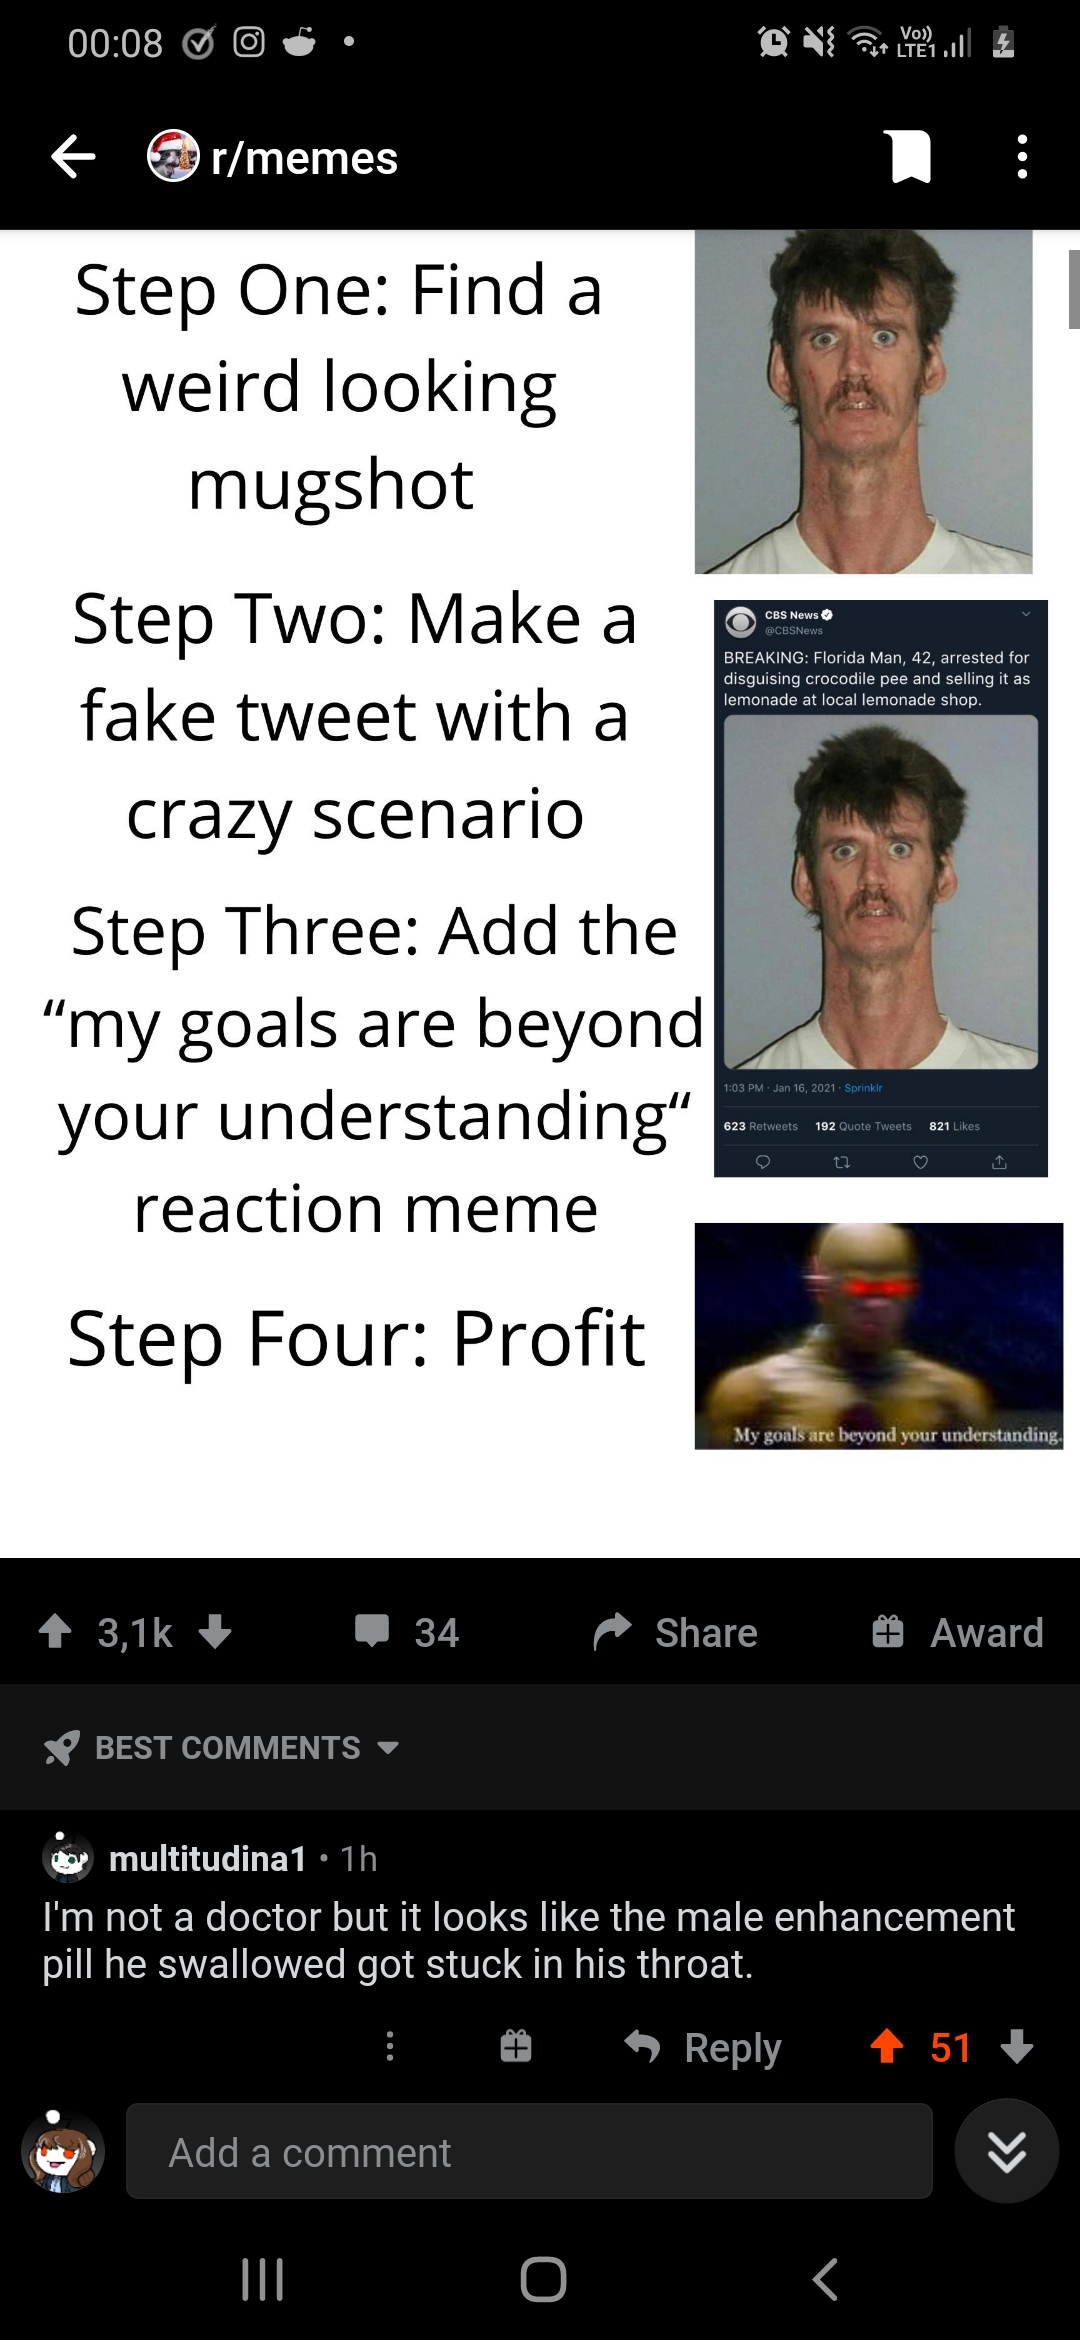 screenshot - rmemes Step One Find a weird looking mugshot Step Two Make a fake tweet with a crazy scenario Step Three Add the "my goals are beyond your understanding" reaction meme Step Four Profit Award Best multitudinal 1h I'm not a doctor but it looks 